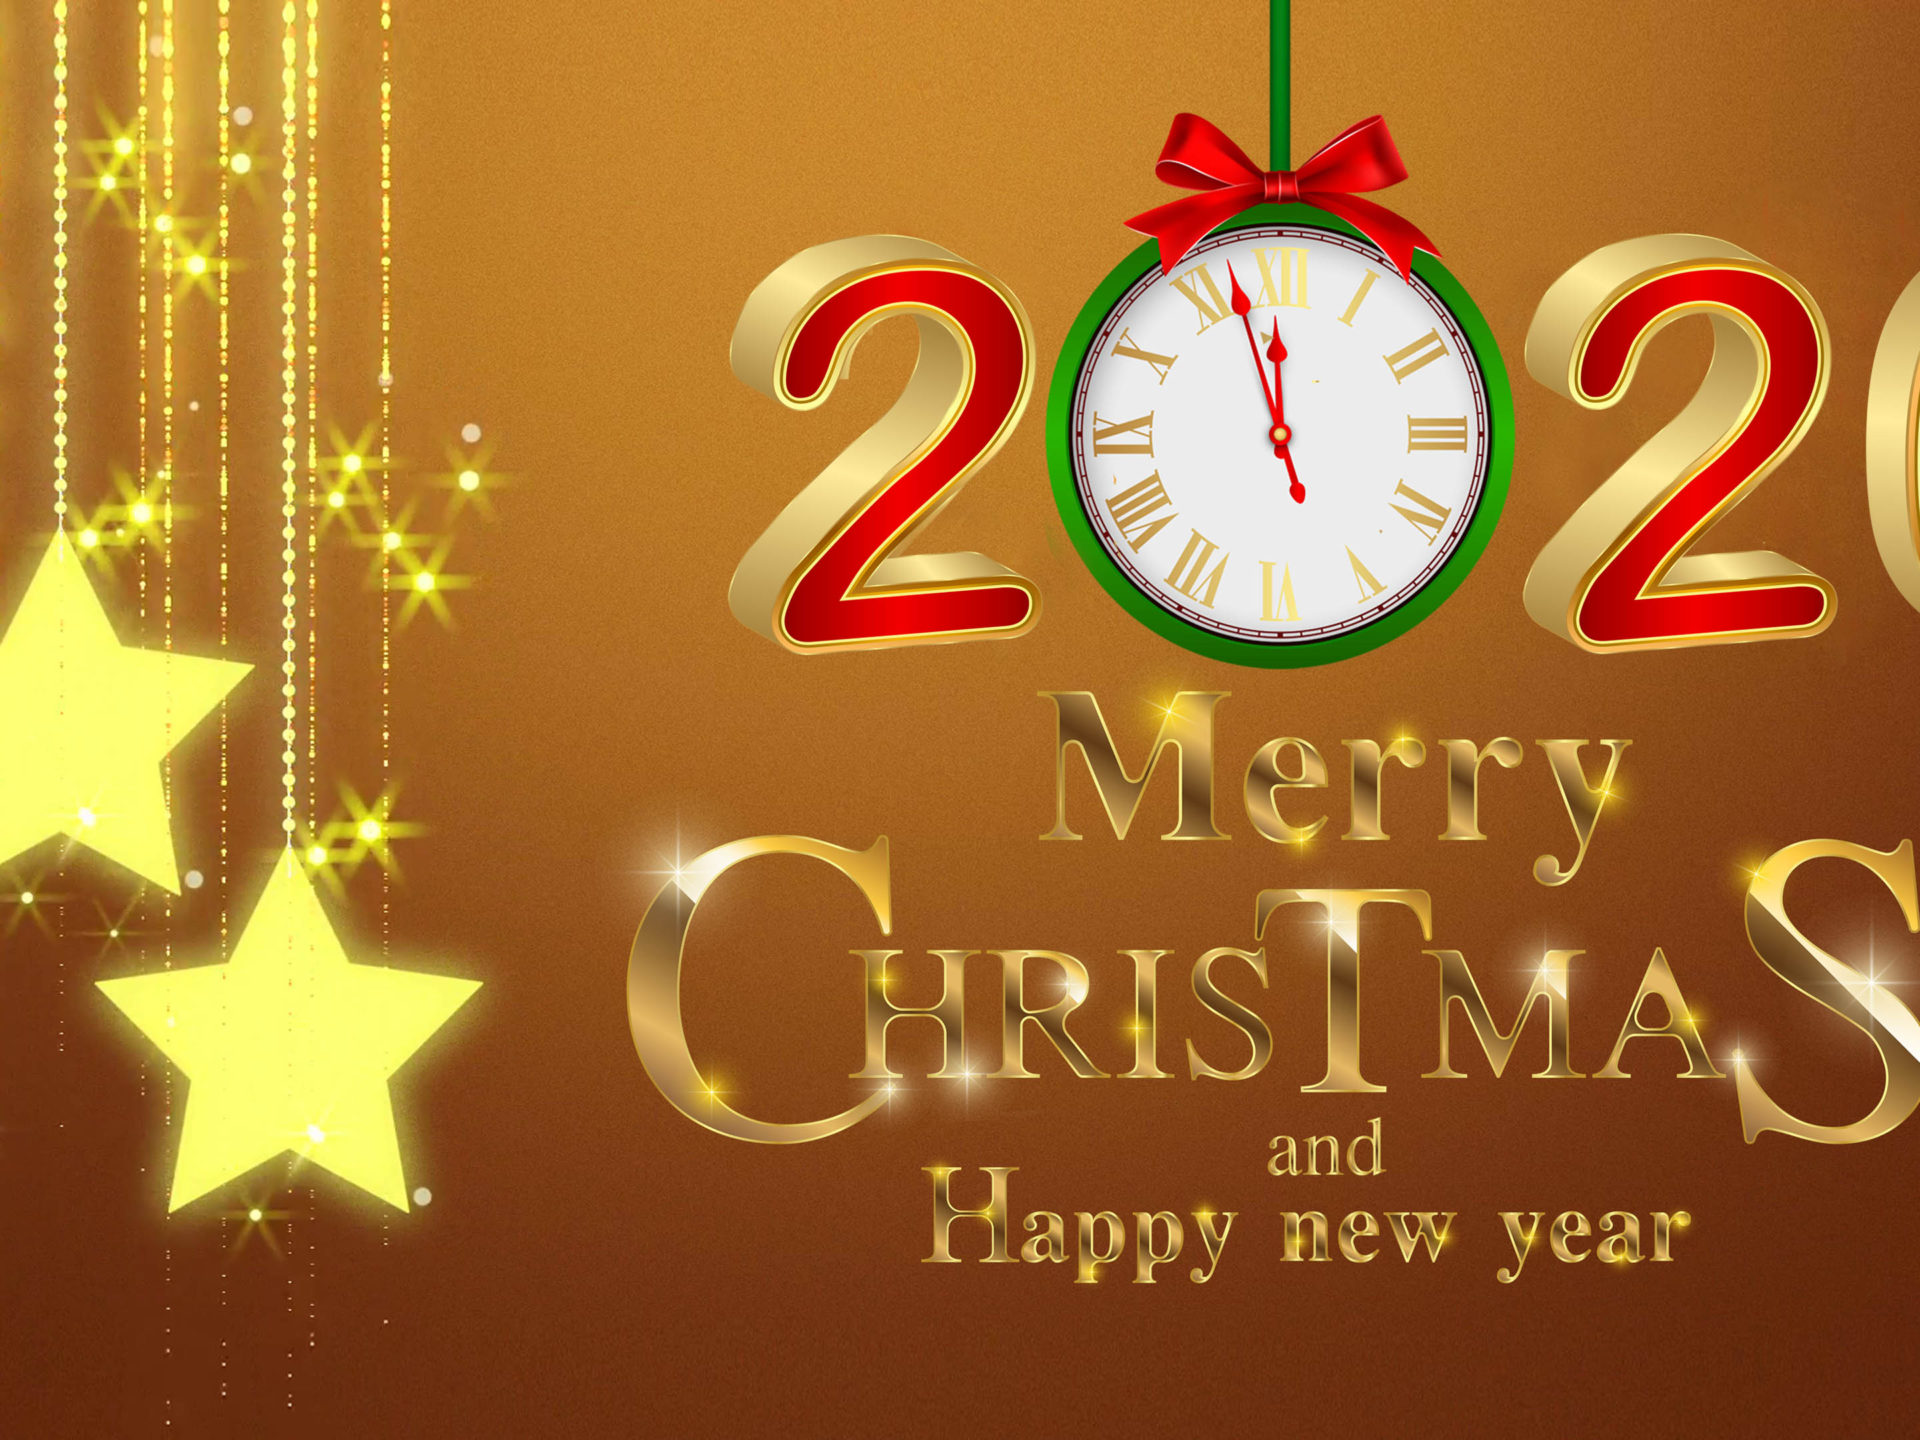 Merry Christmas And Happy New Year 2020 Gold 4k Ultra Hd Desktop